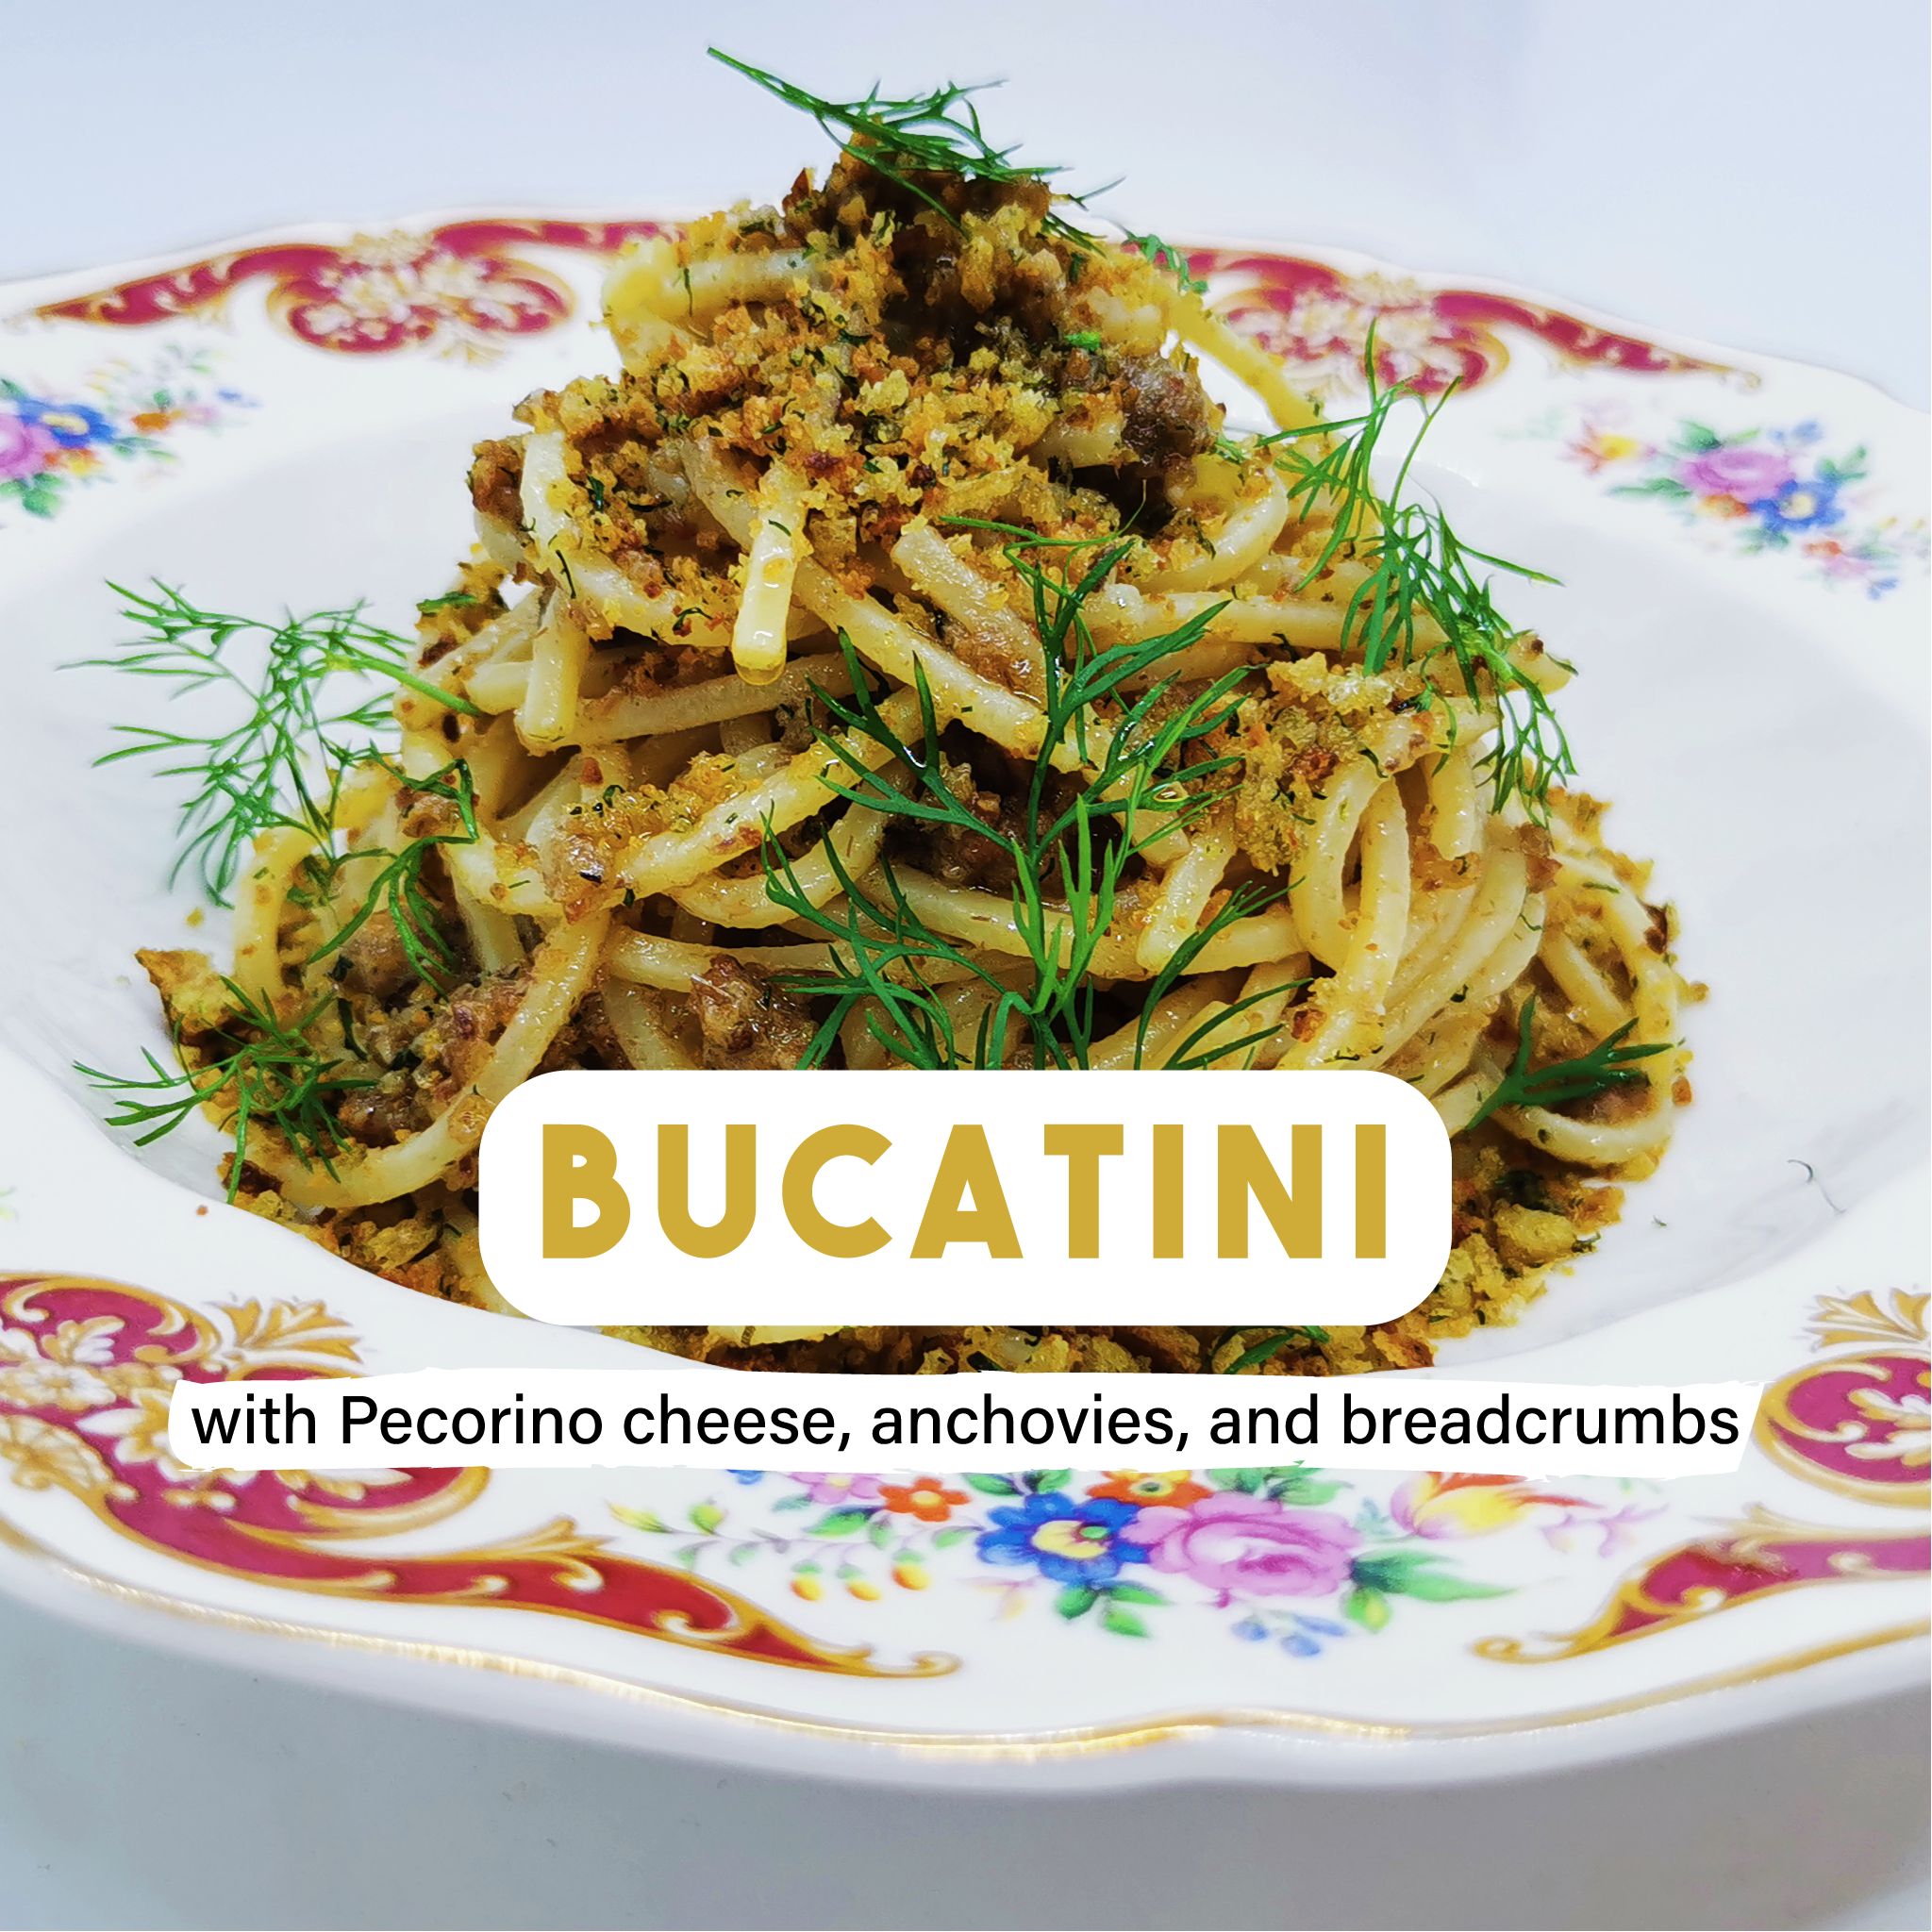 Bucatini with Pecorino cheese, anchovies and breadcrumbs